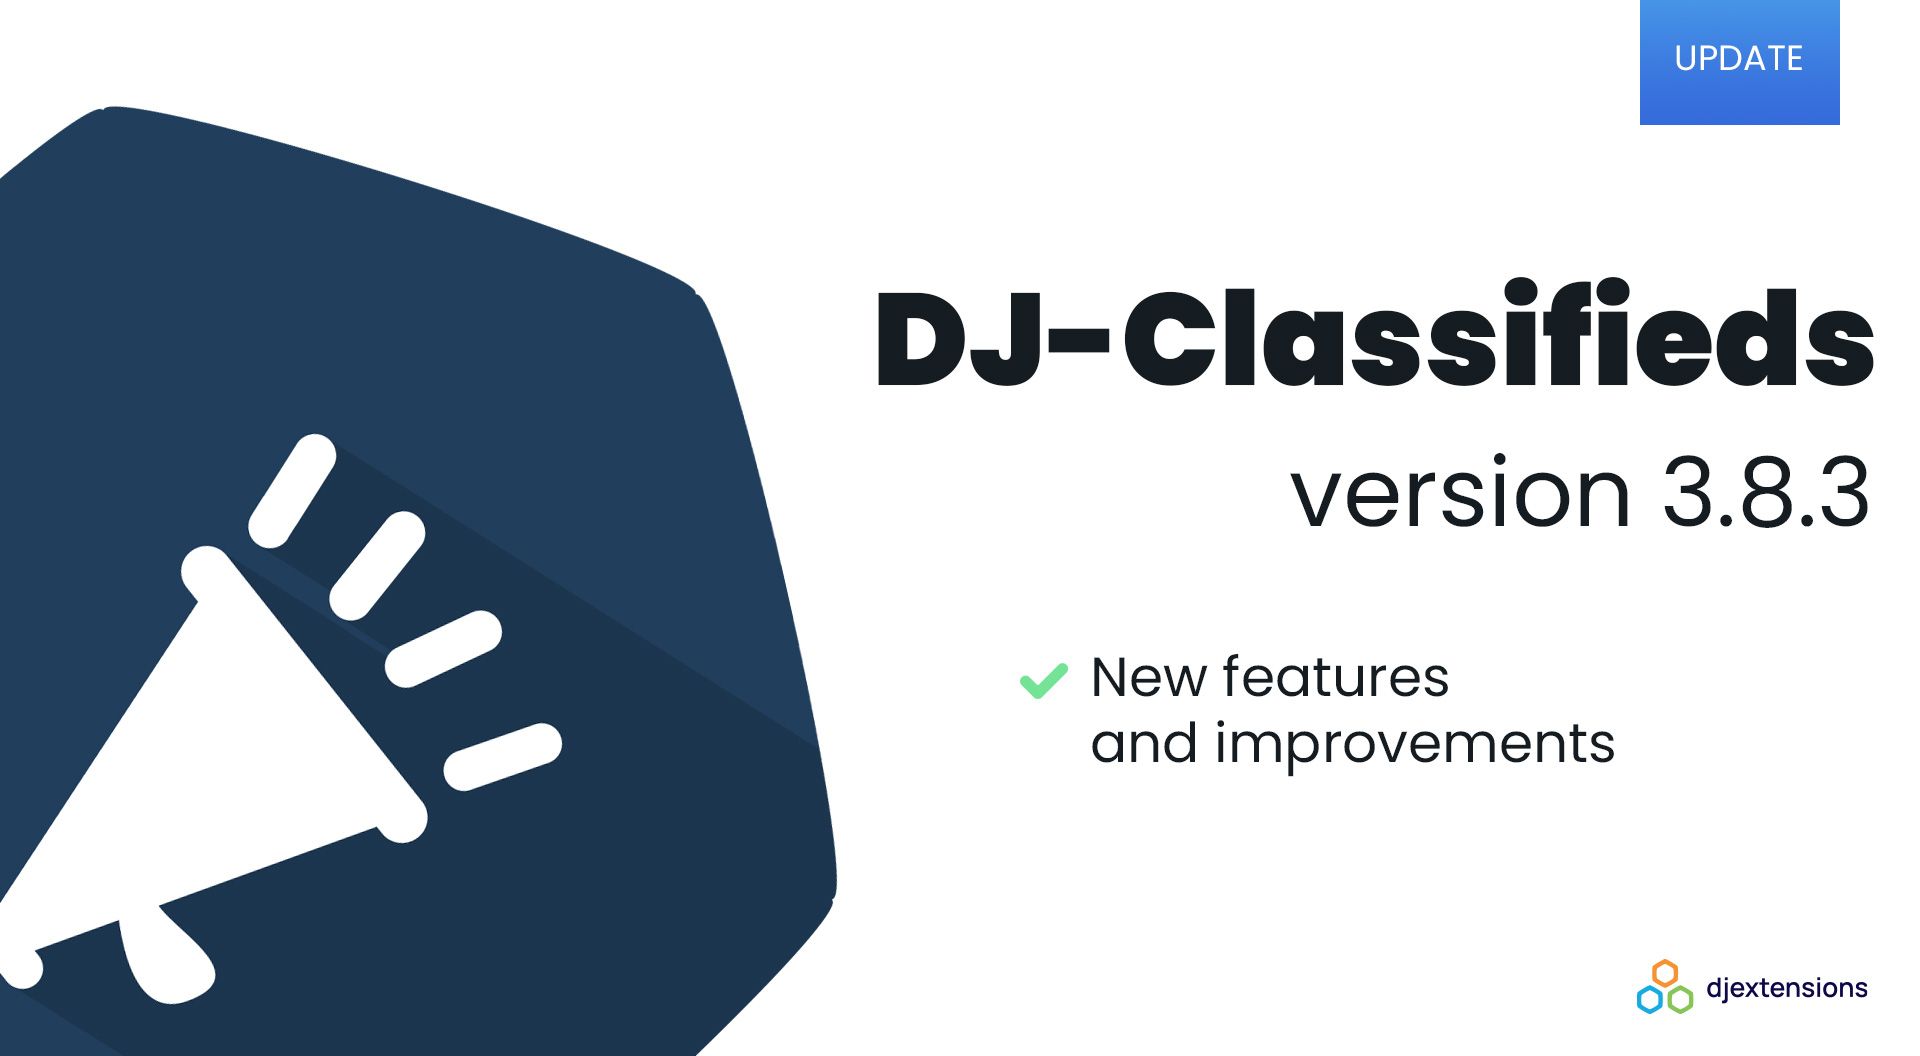 DJ-Classifieds 3.8.3 update comes with a set of important new features and improvements